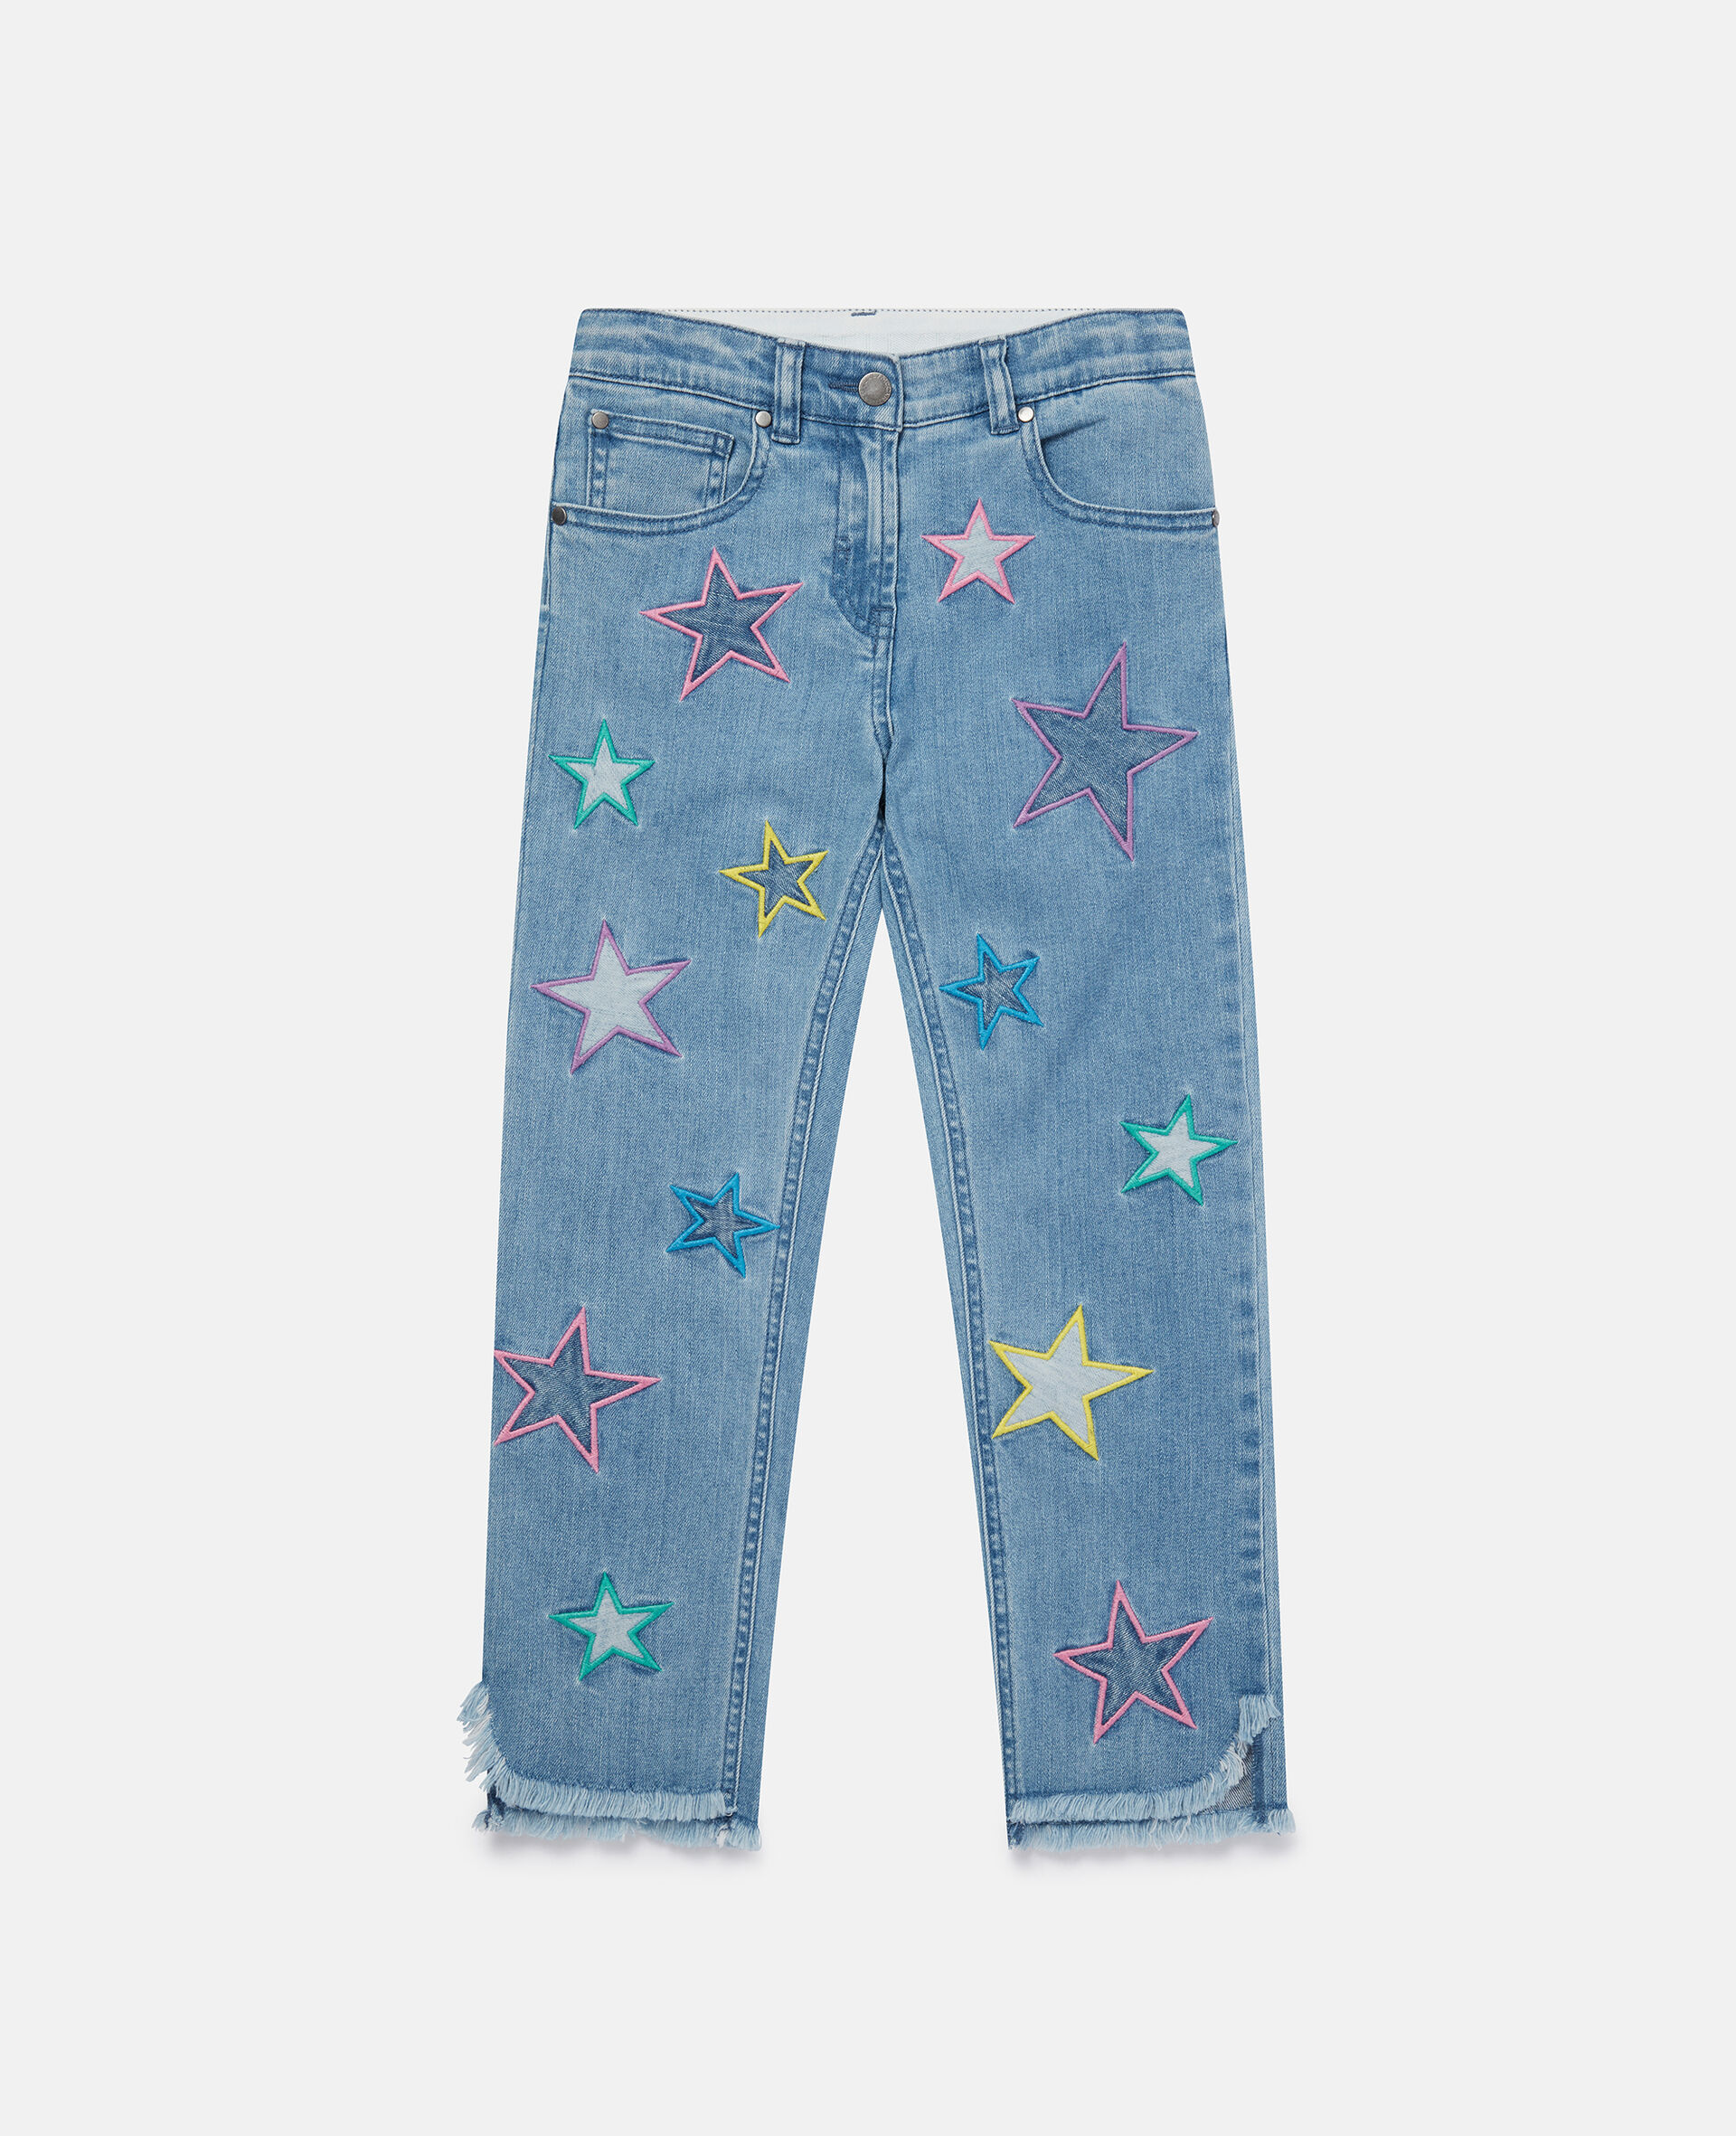 Embroidered Star Denim Trousers-Blue-large image number 0